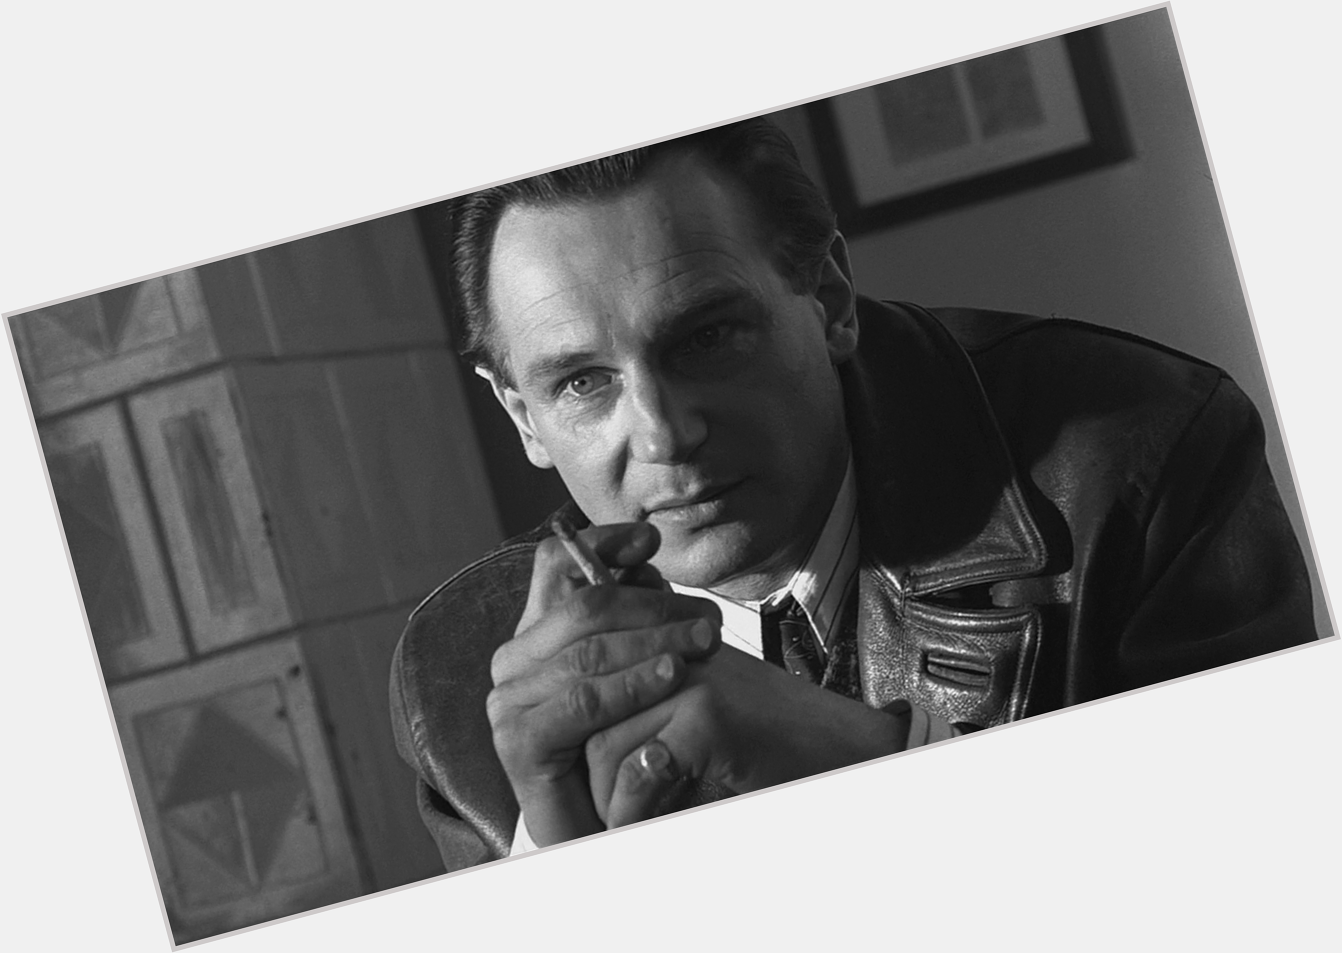 Happy Birthday to Liam Neeson, here in SCHINDLER\S LIST! 